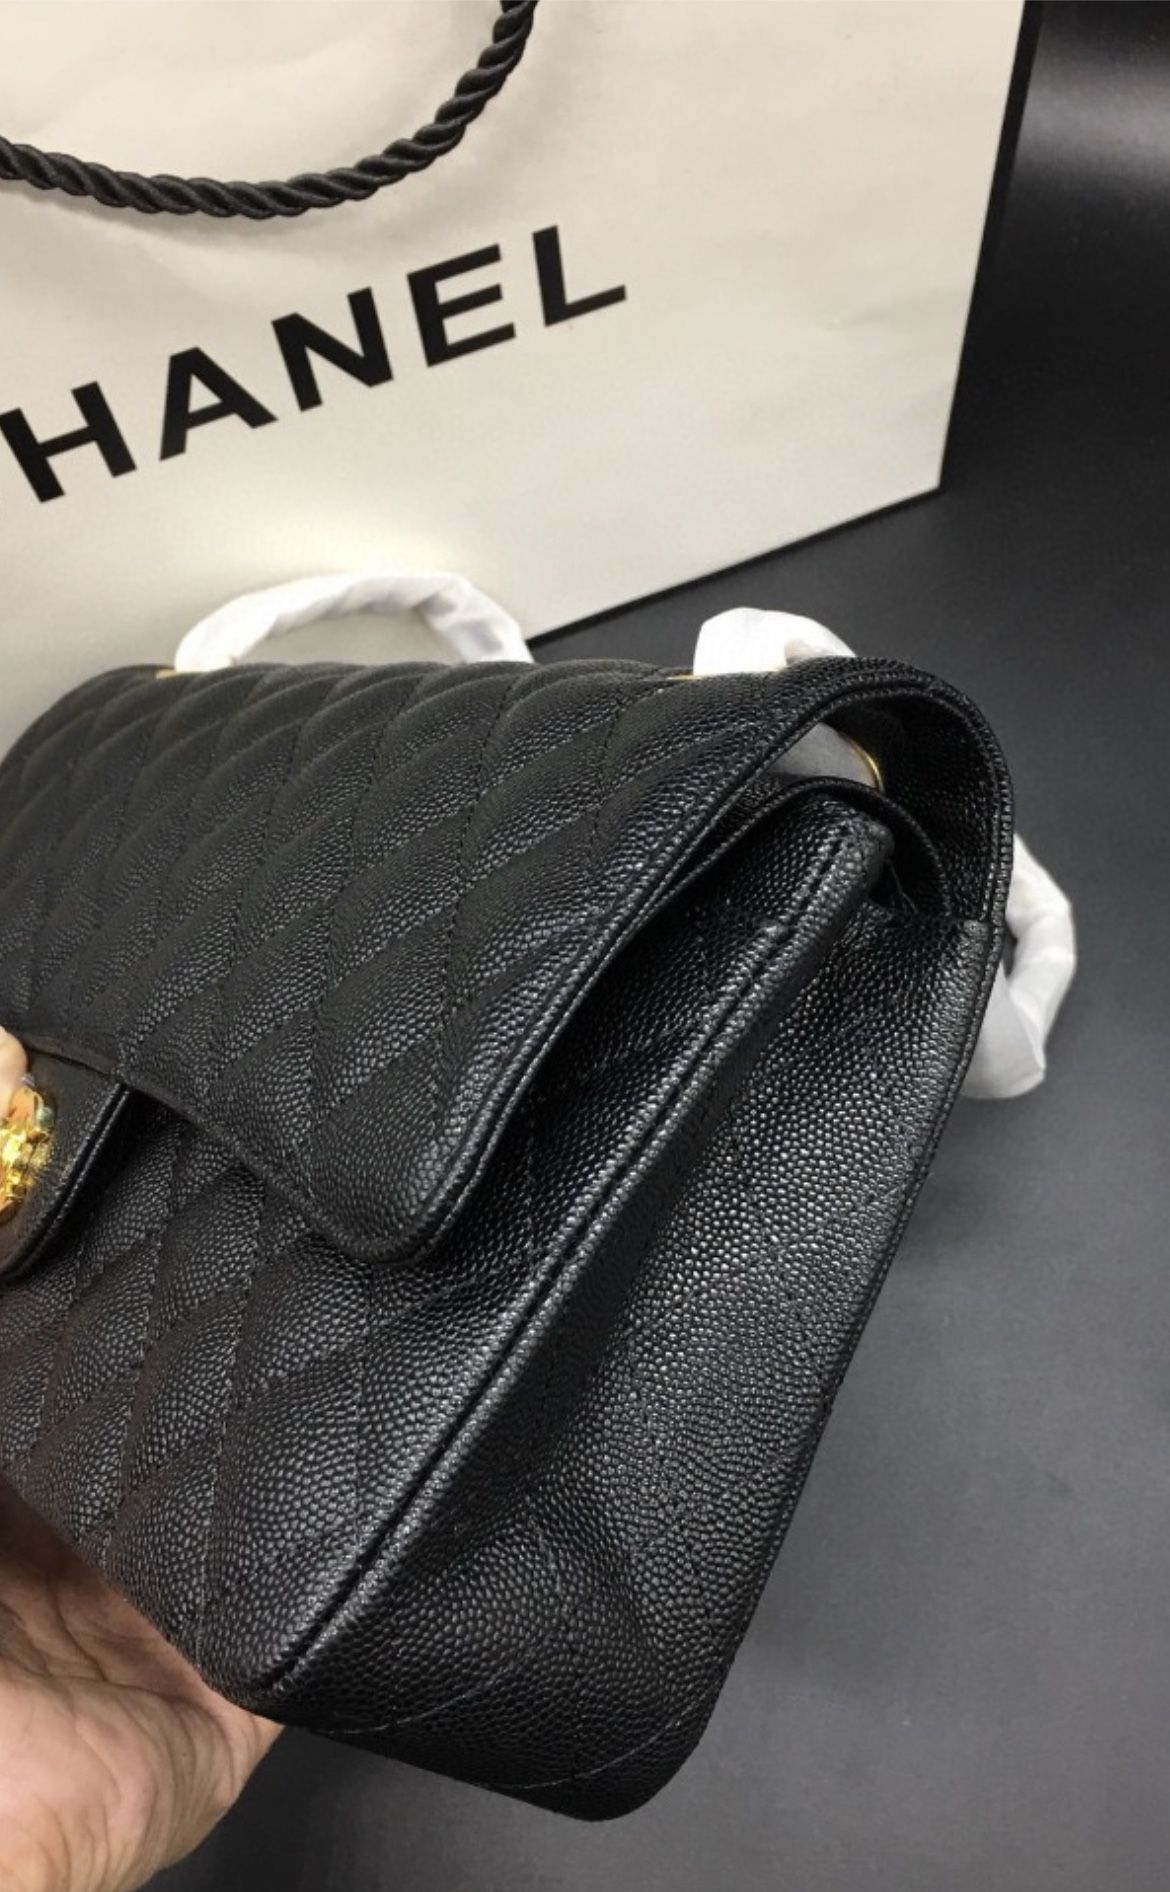 Chanel paper bag for Sale in Hollywood, FL - OfferUp